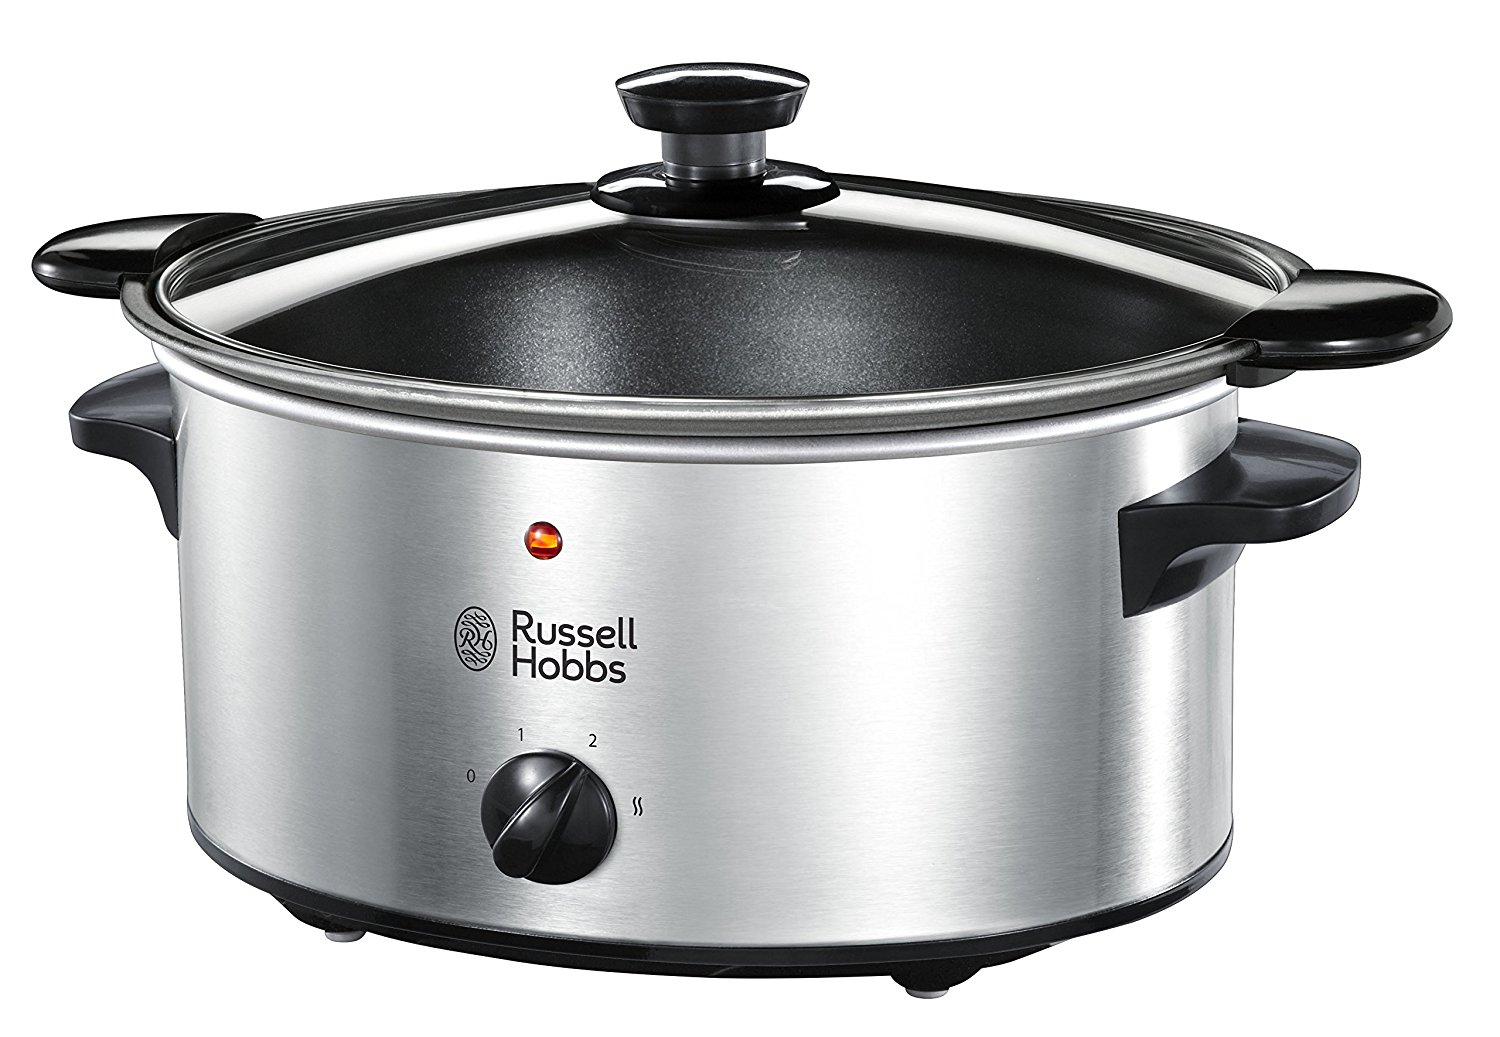 Russel Hobbs Cook at Home 22740